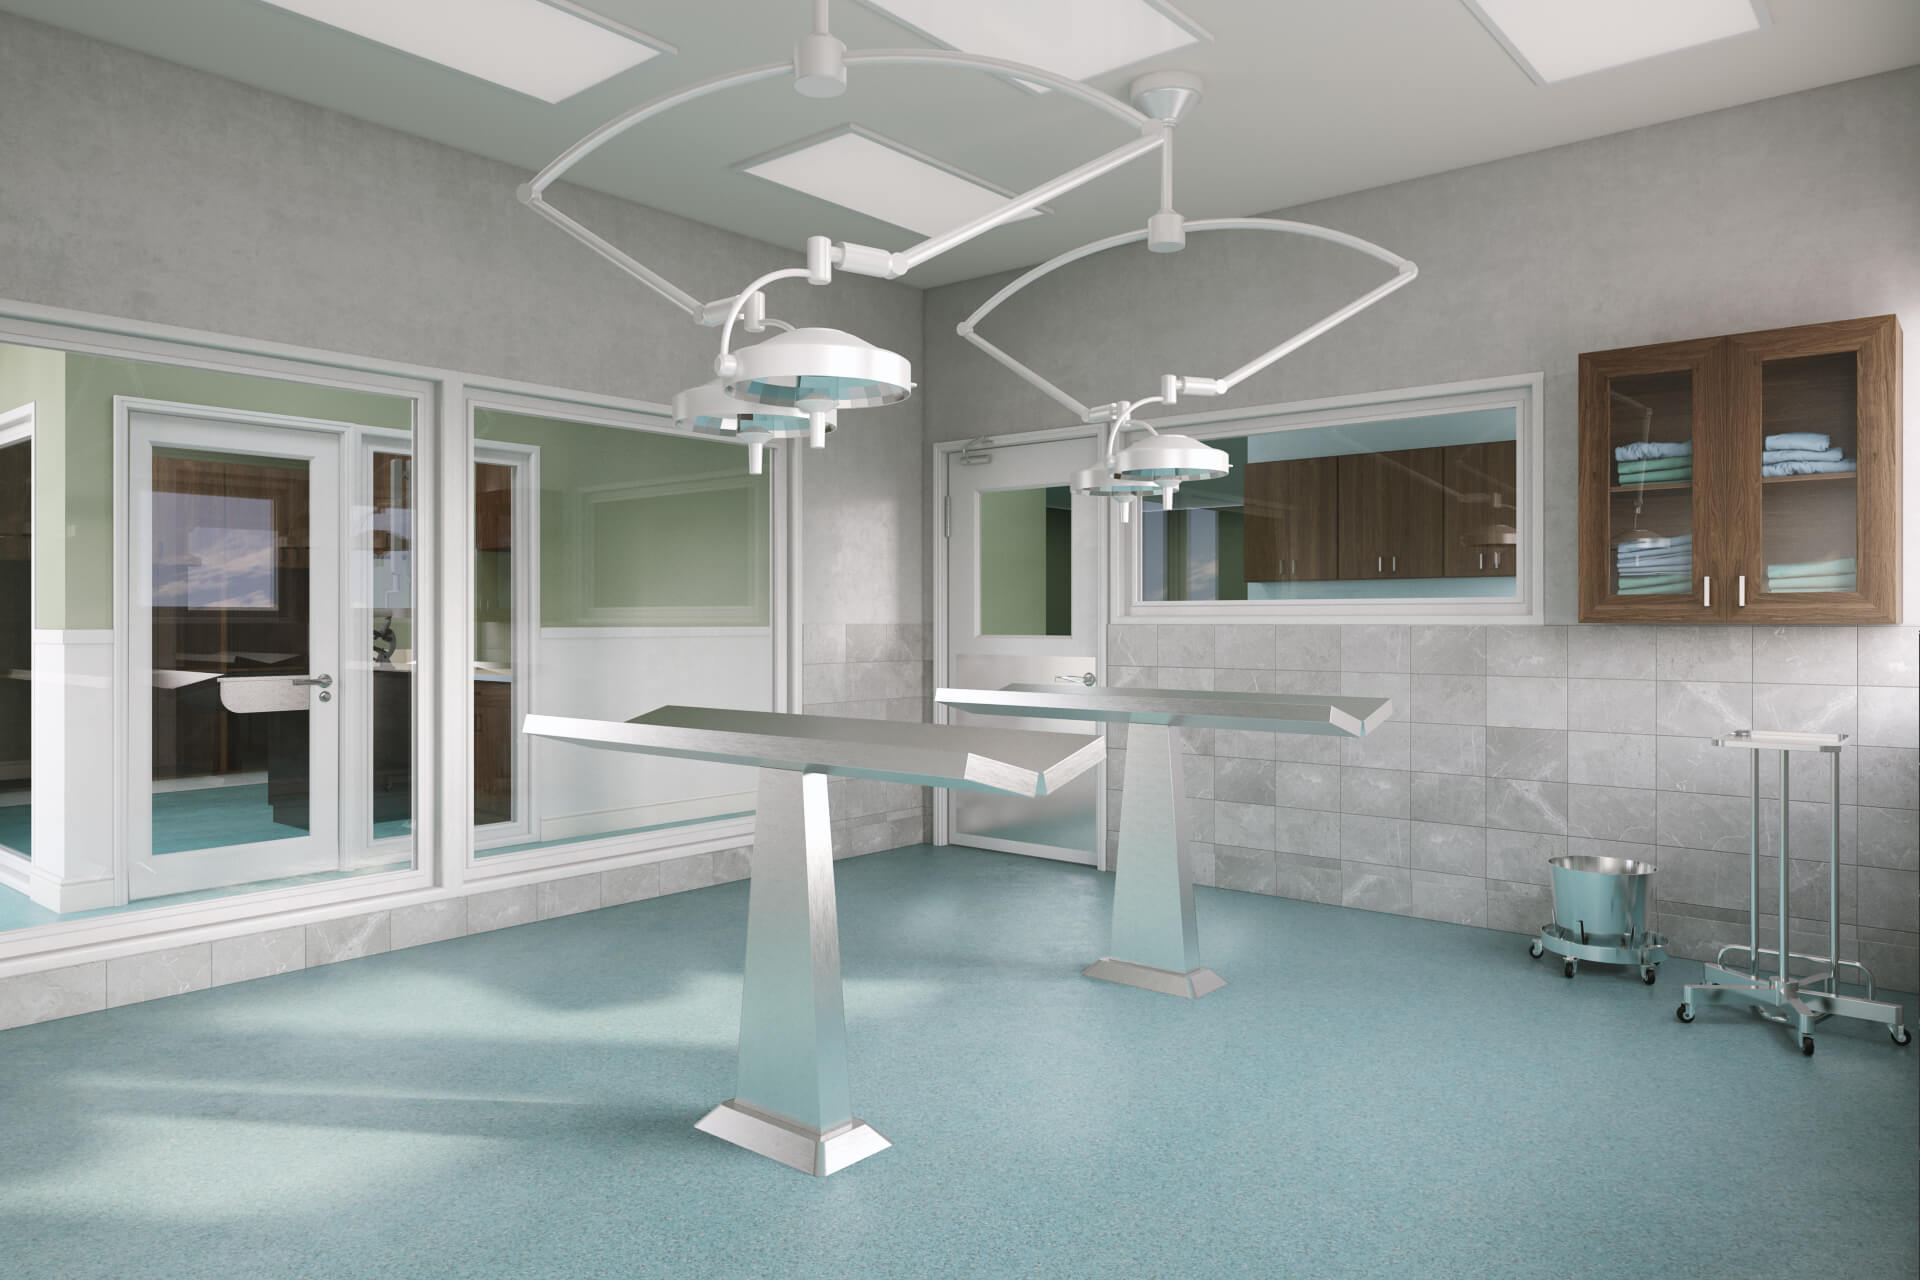 Second Version of the Operating Room 3D Render